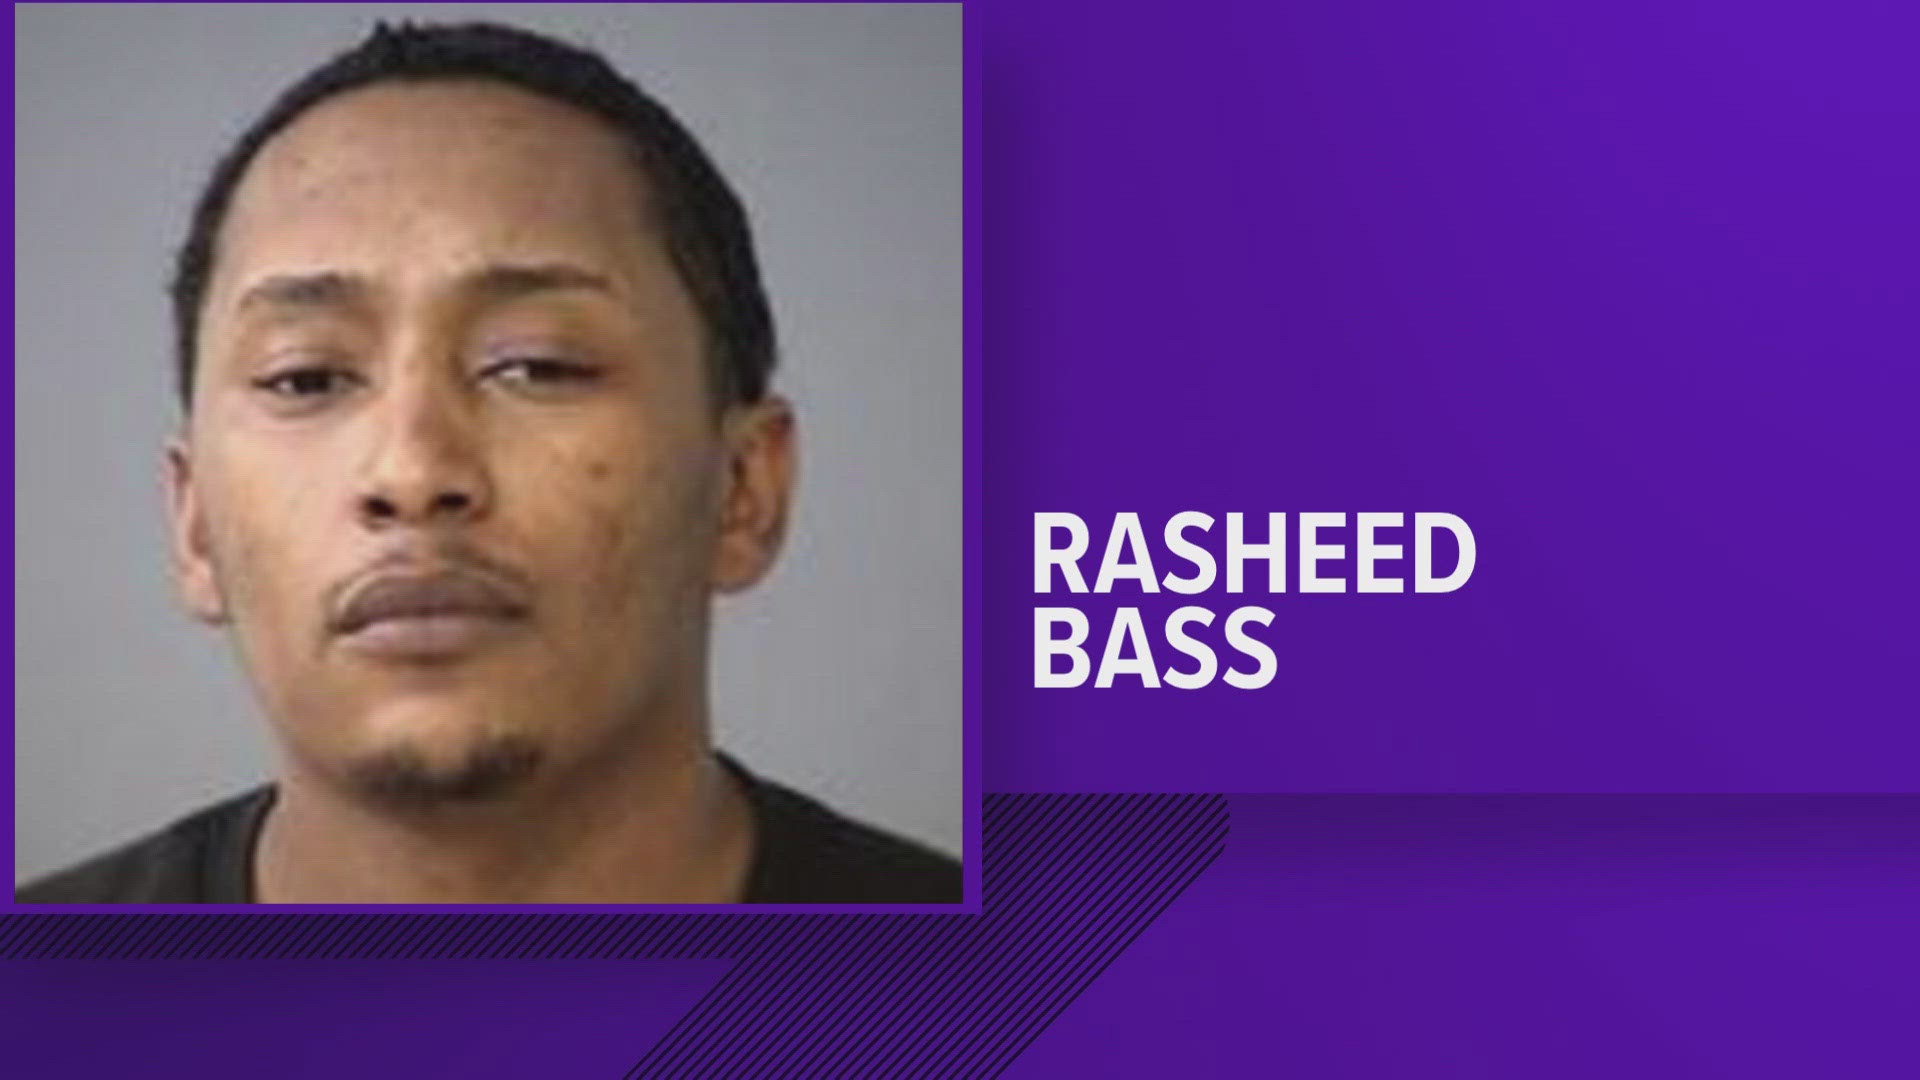 A judge convicted Rasheed Bass this week on charges of murder and armed robbery for the 2020 killing of 27-year-old Justus Hudson.